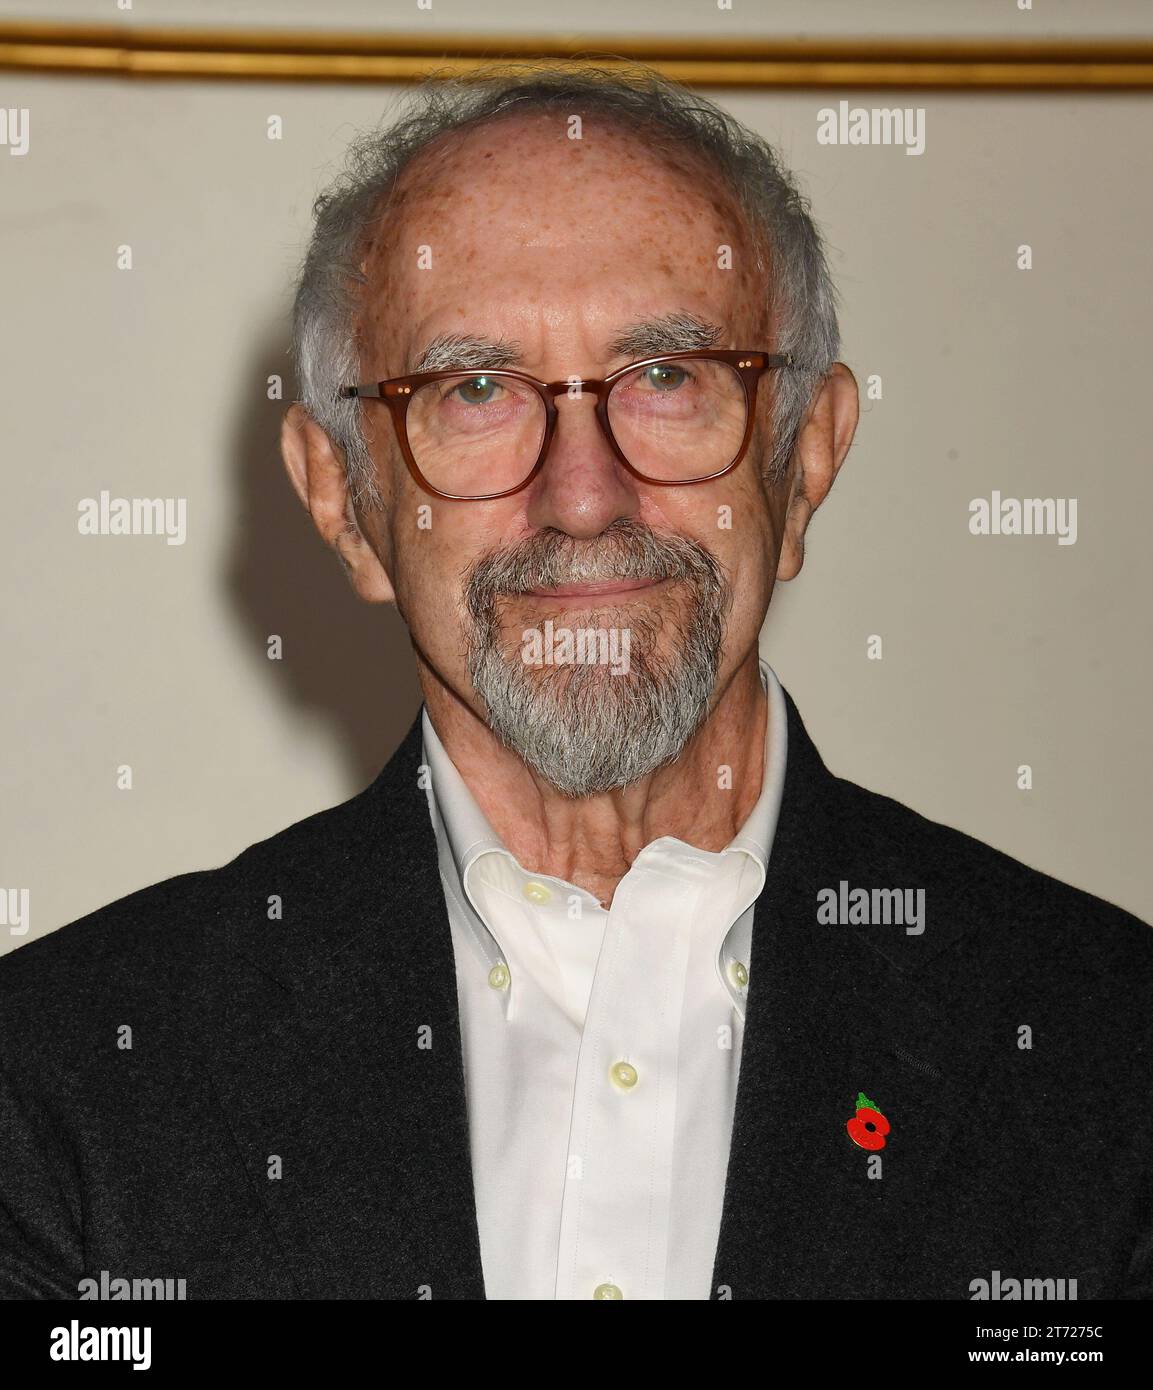 Los Angeles, California, USA. 12th Nov, 2023. Jonathan Pryce attends the premiere of Netflix's 'The Crown' Season 6 Part 1 at Regency Village Theatre on November 12, 2023 in Los Angeles, California. Credit: Jeffrey Mayer/Jtm Photos/Media Punch/Alamy Live News Stock Photo